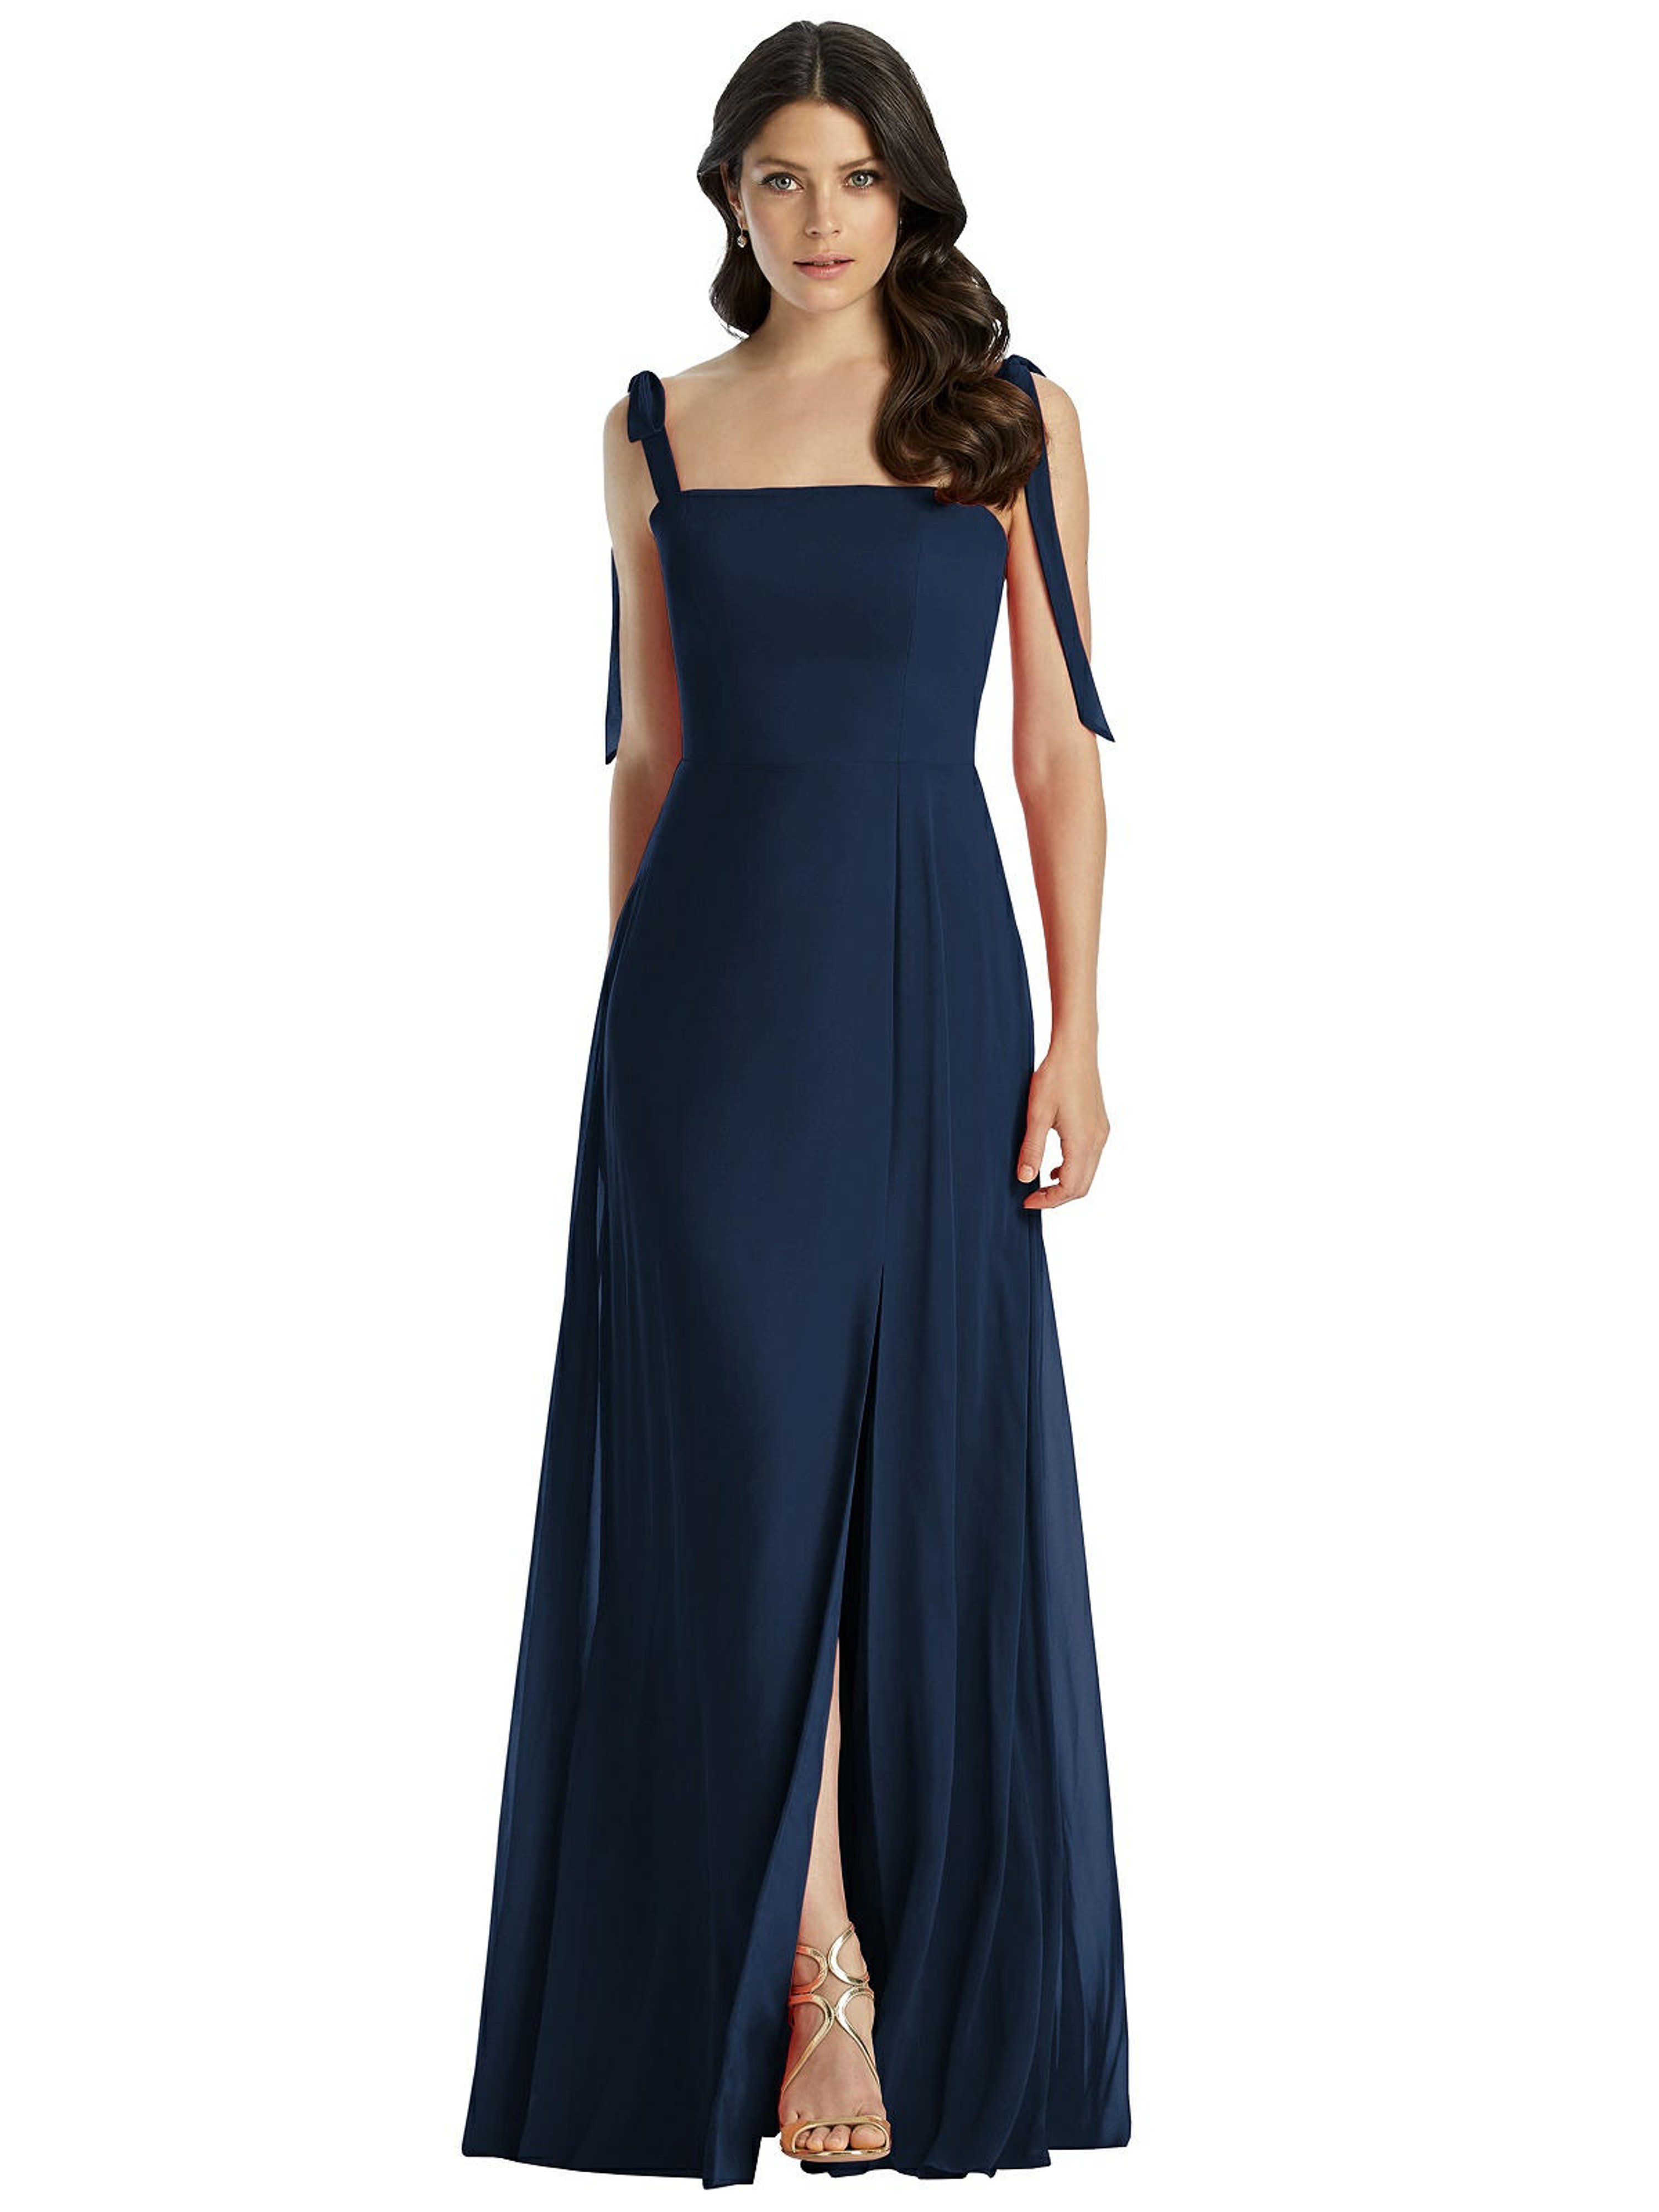 DESSY COLLECTION DESSY COLLECTION TIE SHOULDER CHIFFON MAXI DRESS WITH FRONT SLIT